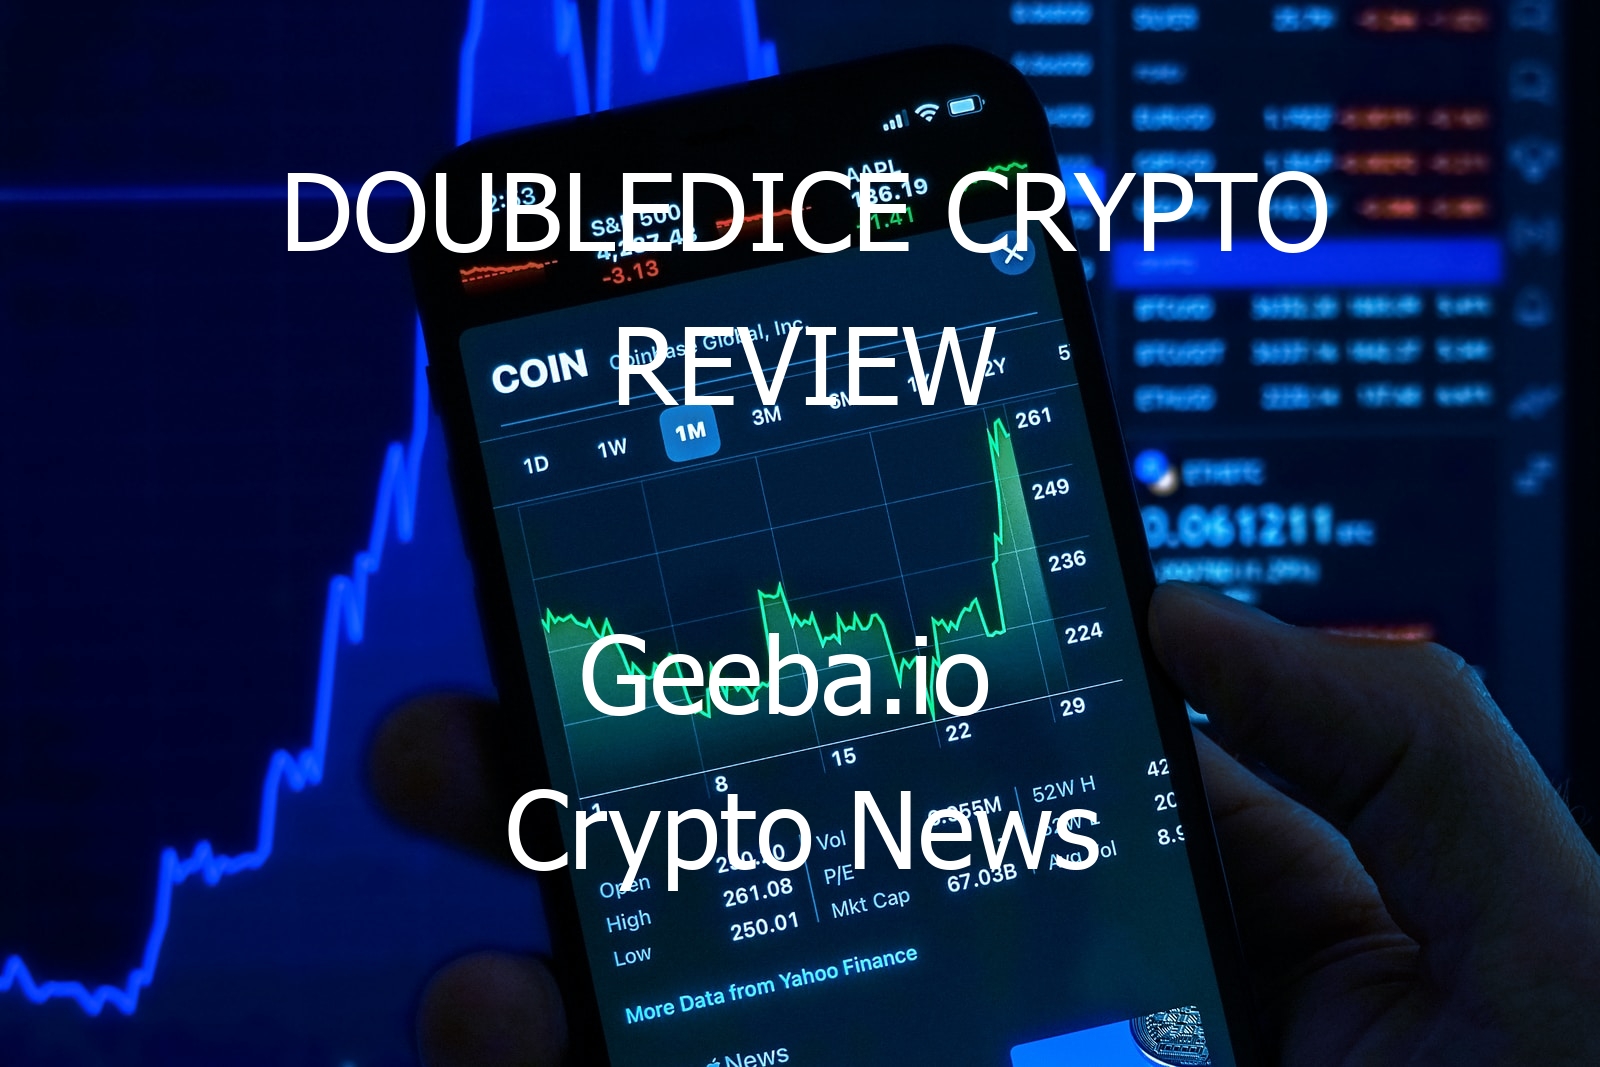 doubledice crypto review 6304